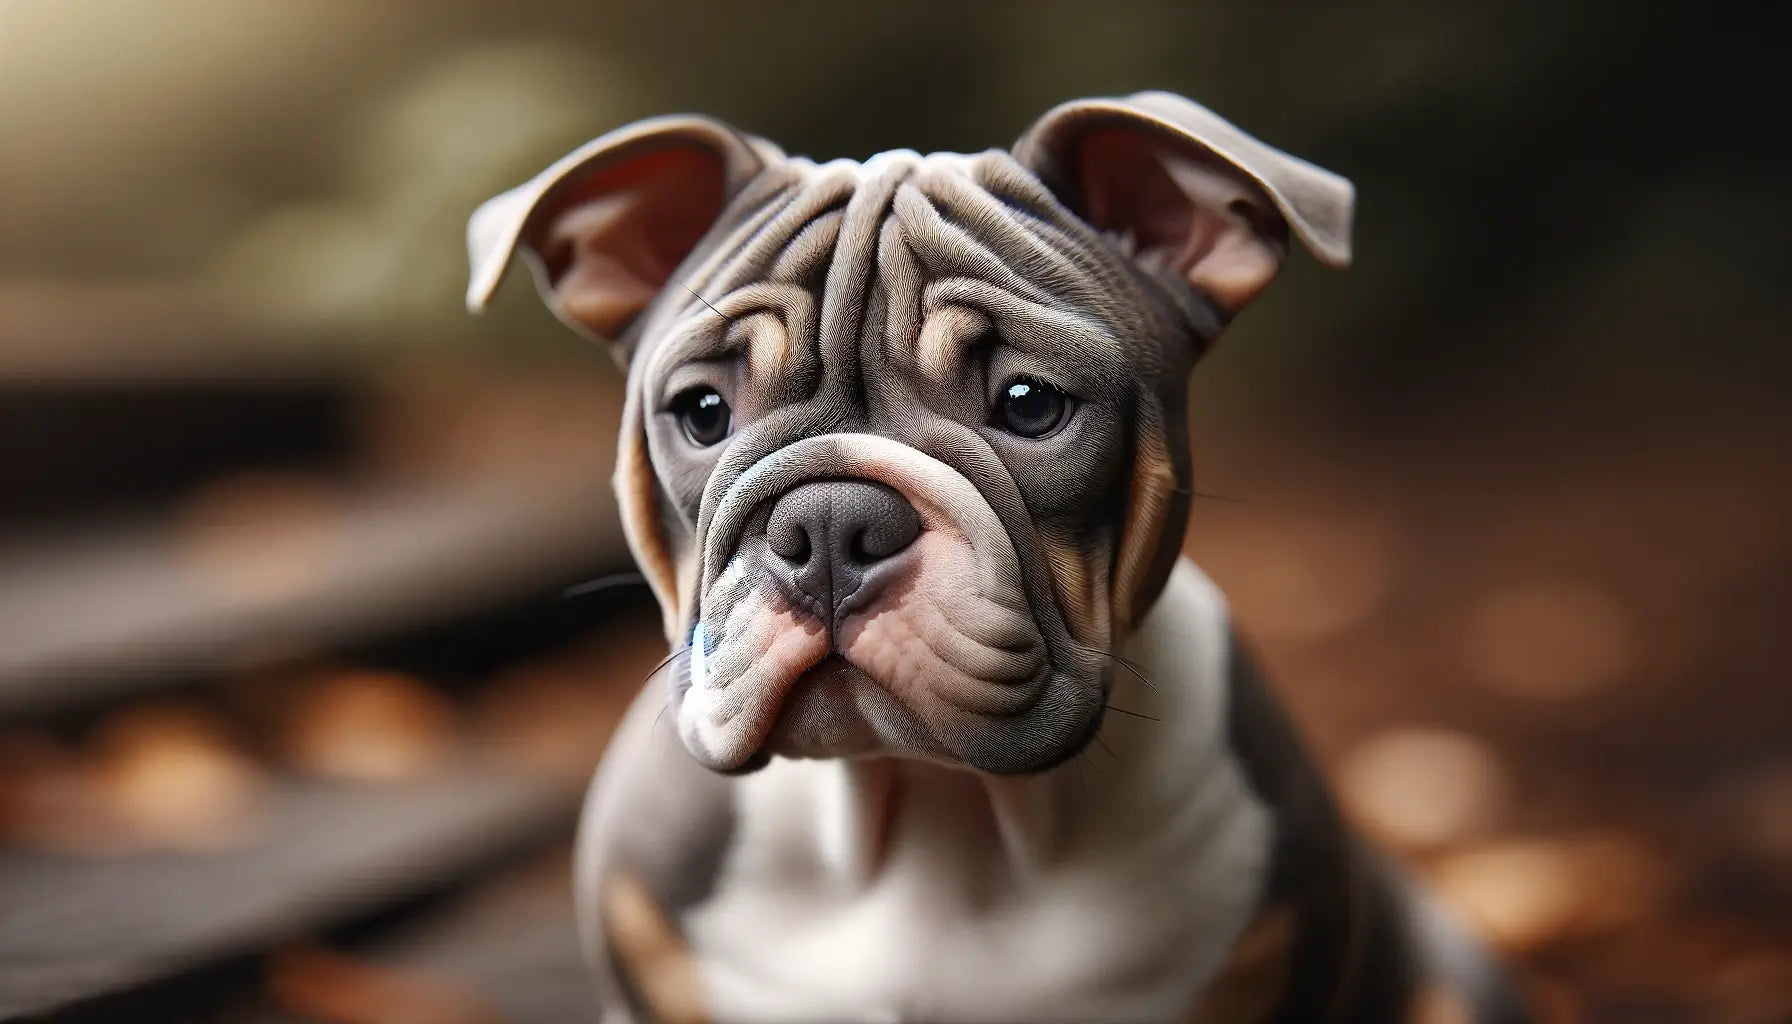 Micro Bully with facial wrinkles, especially around the brow, giving it a thoughtful appearance